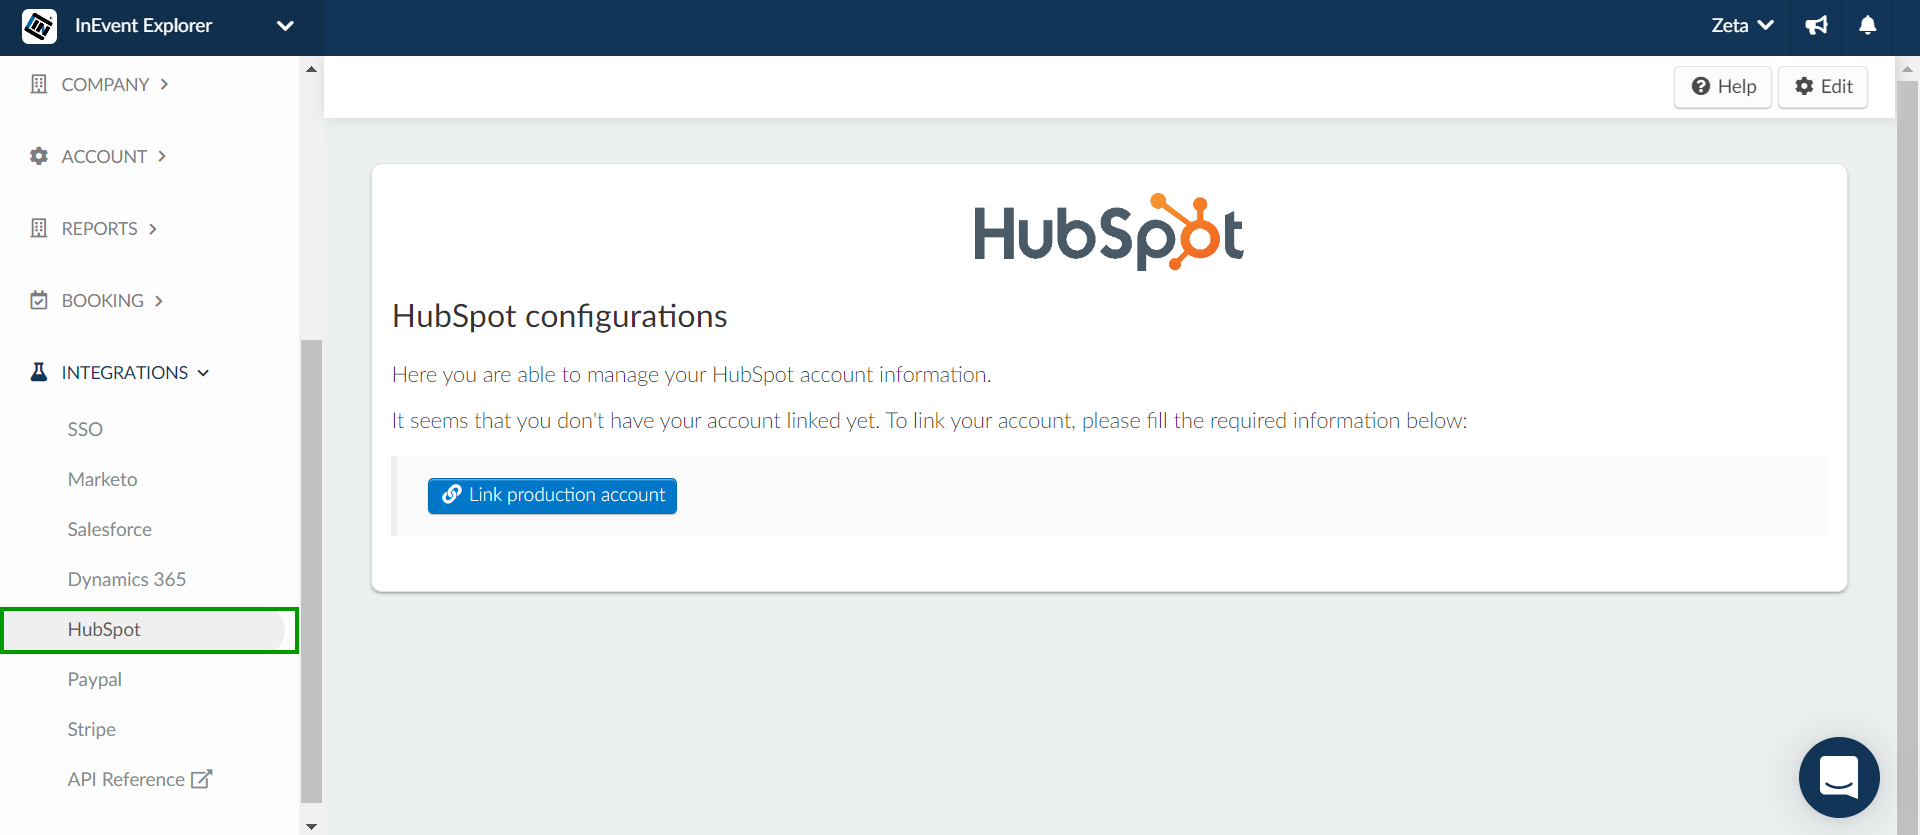 Hubspot integration on the company level